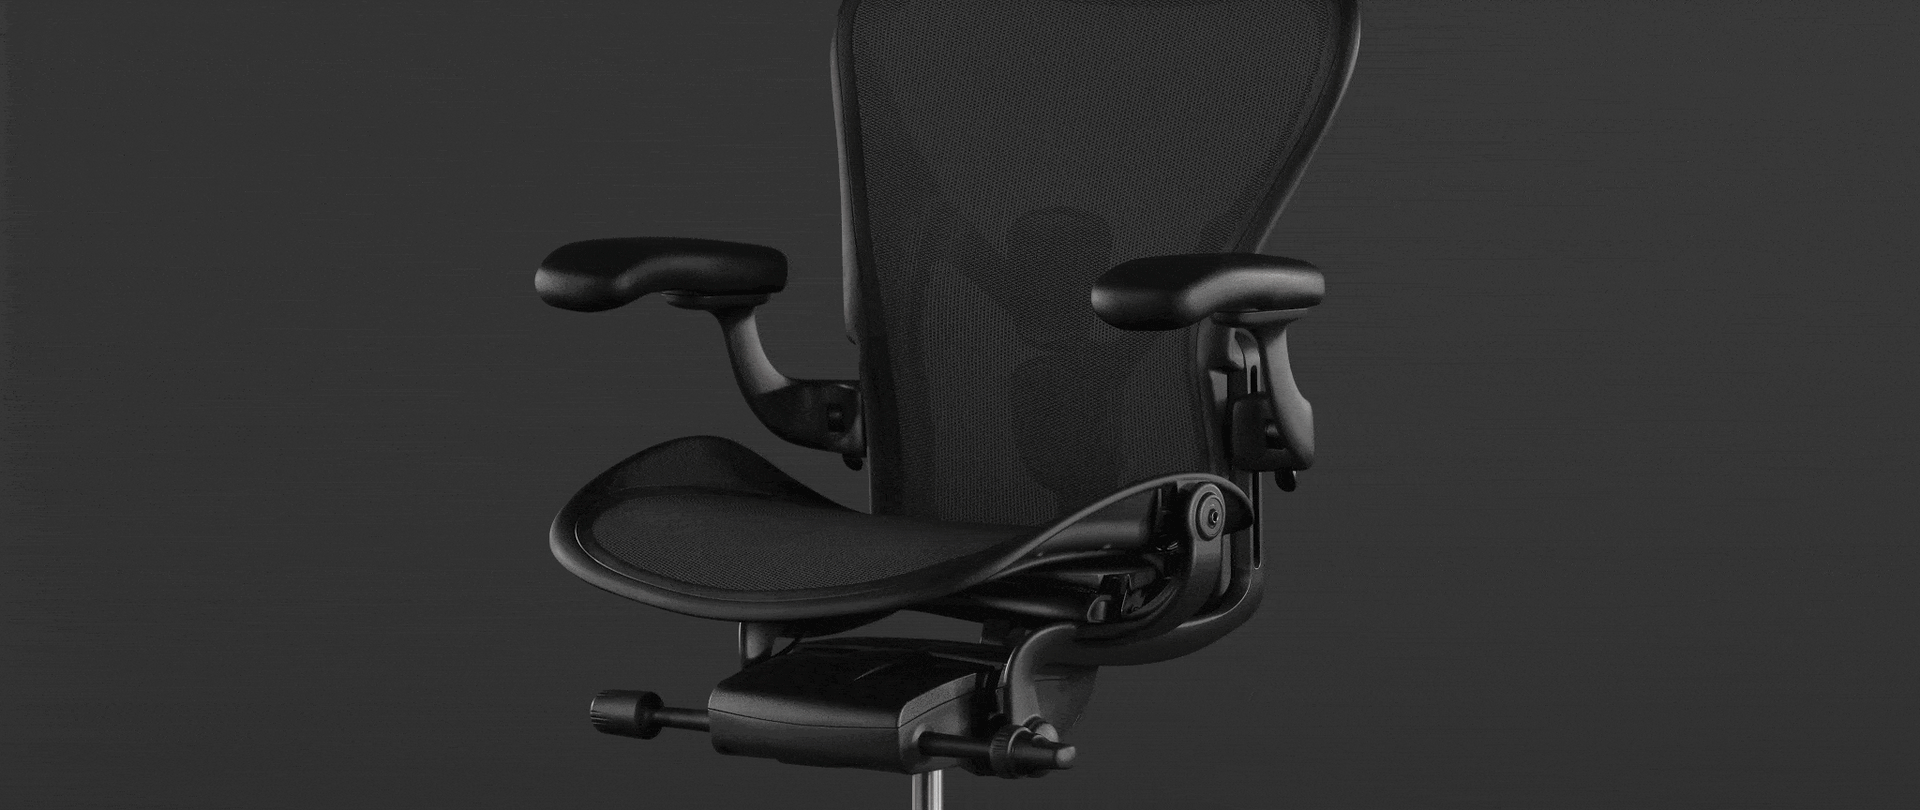 An animation highlighting the Embody Gaming Chair’s BackFit adjustment, overlaid on a photo of the chair on a black background.